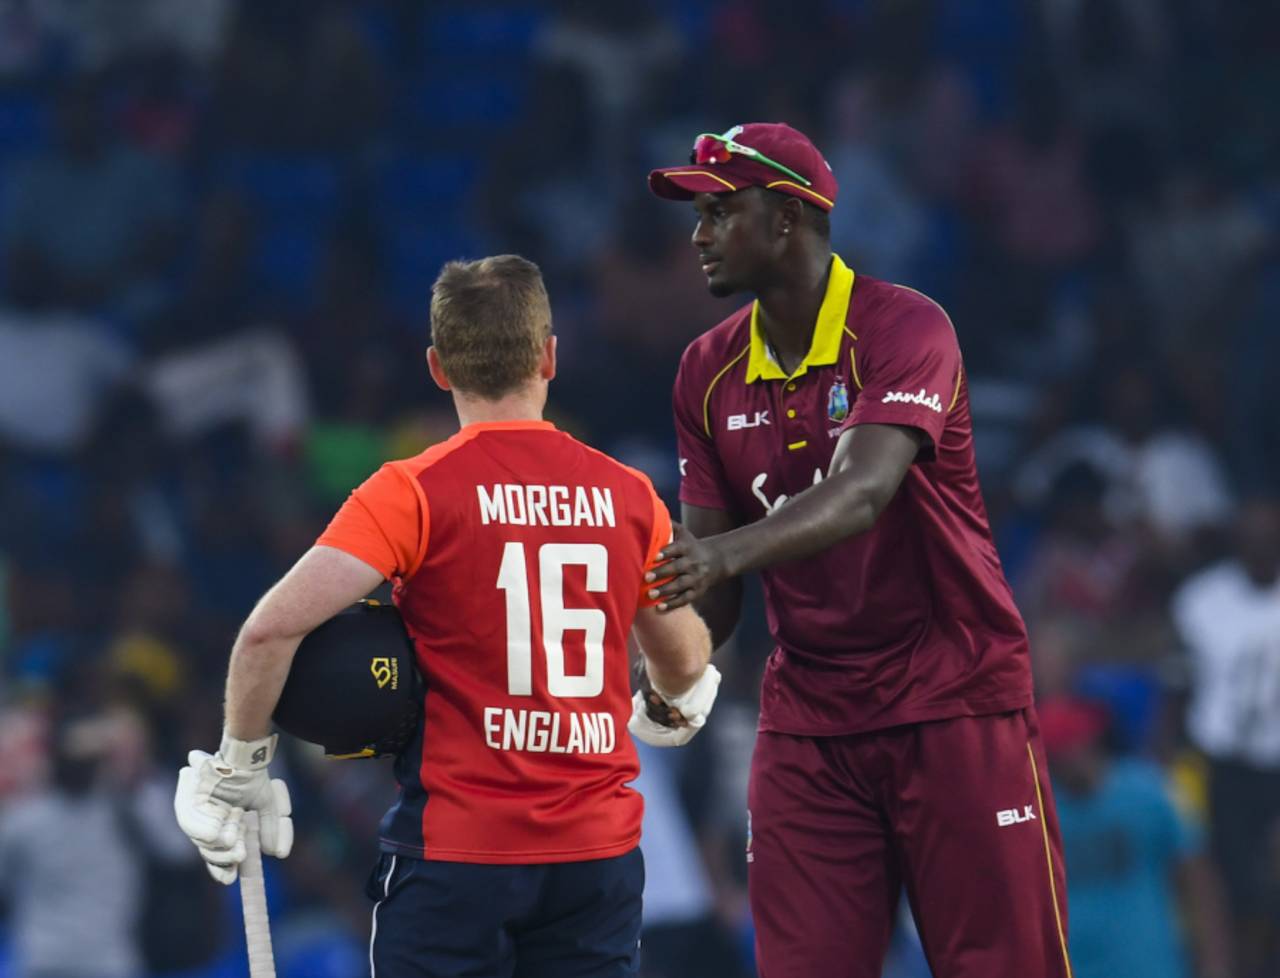 Jason Holder congratulates Eoin Morgan, West Indies v England, 3rd T20I, St Kitts, March 10, 2019